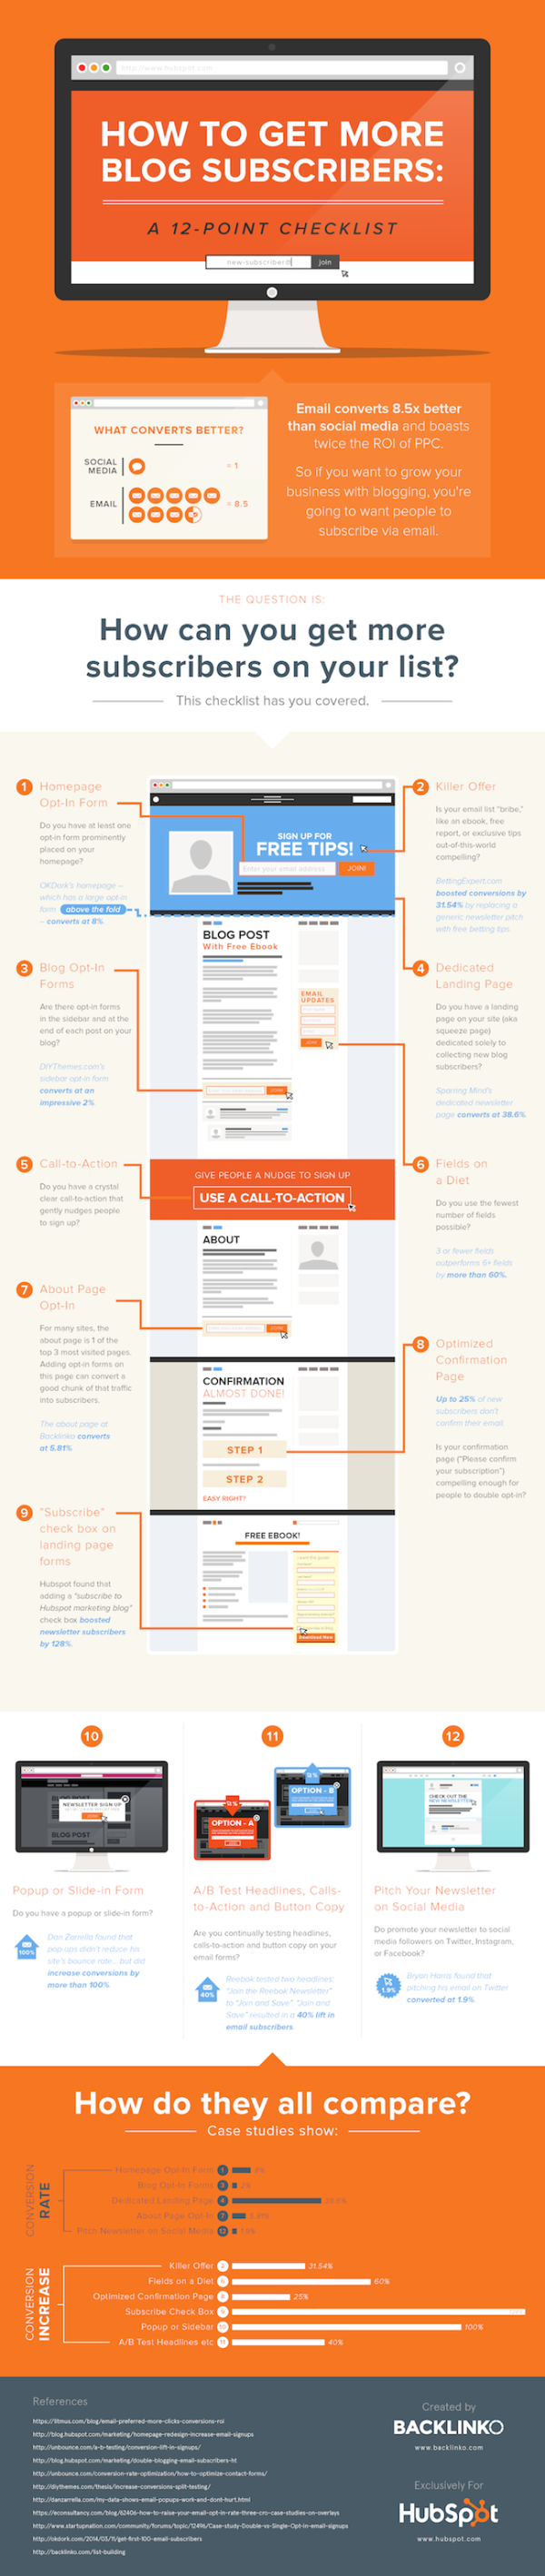 Infographic Inspiration From The Best Brands In Content Marketing image hubspot infographic 600x2837.png